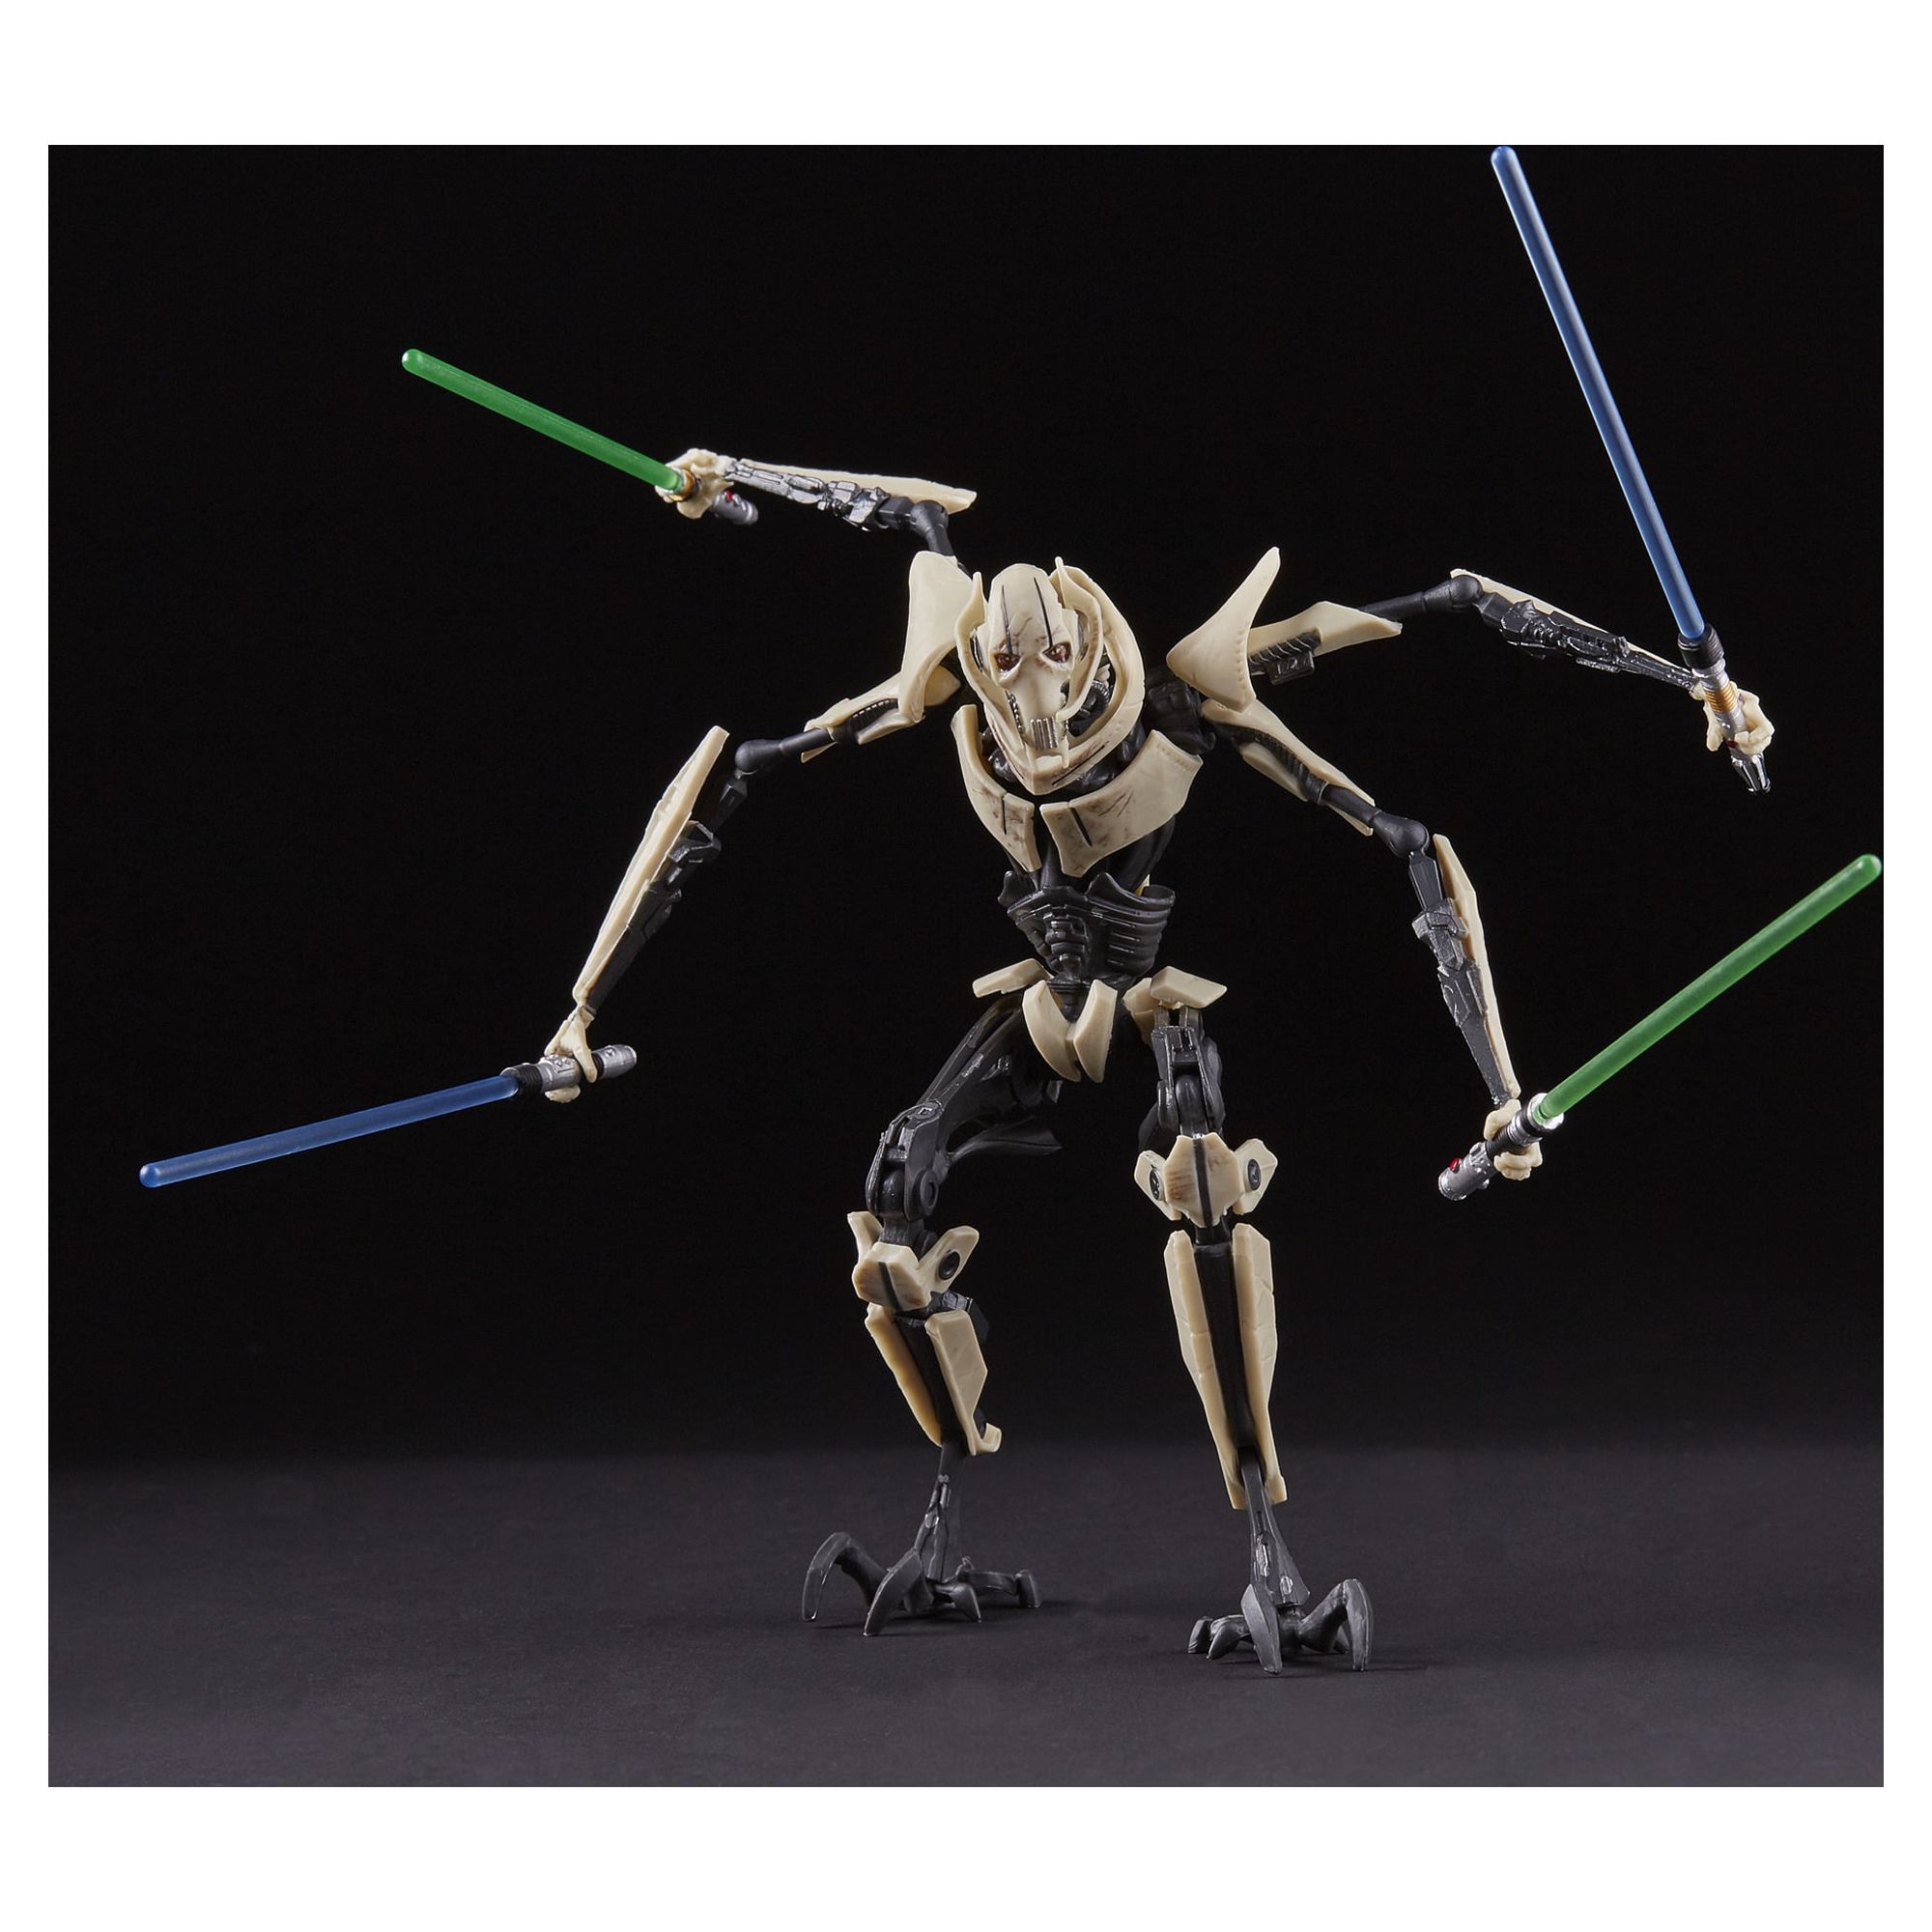 Star Wars: The Black Series General Grievous Kids Toy Action Figure for Boys and Girls (9”) - image 1 of 8